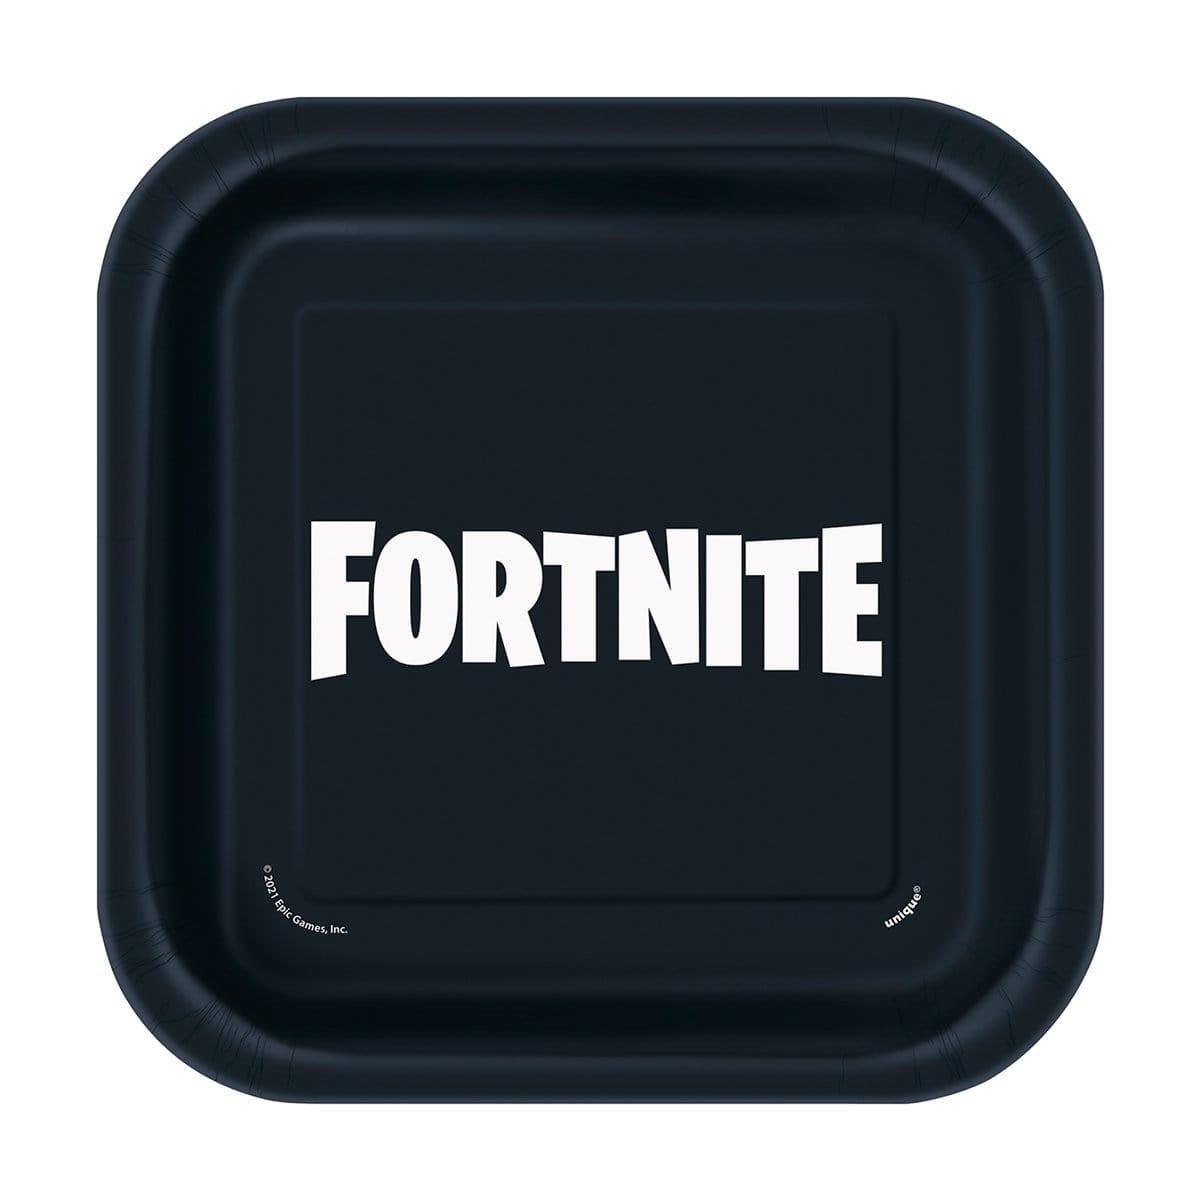 Buy Kids Birthday Fortnite Dessert Plates 7 Inches, 8 Count sold at Party Expert